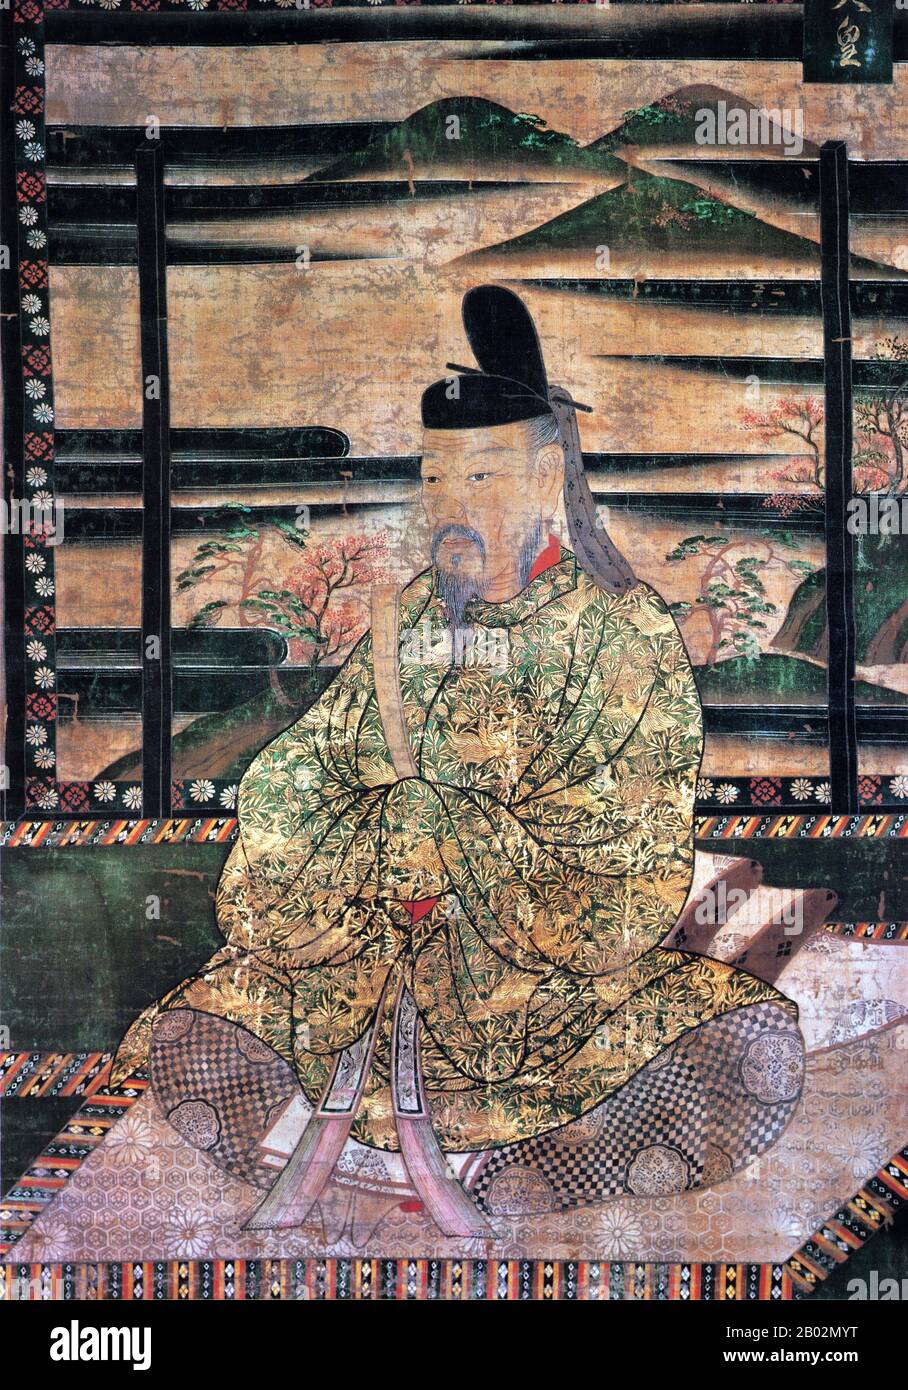 Emperor Saga (嵯峨天皇 Saga-tennō, February 8, 785 – August 24, 842) was the 52nd emperor of Japan, according to the traditional order of succession. Saga's reign spanned the years from 809 through 823.  Saga was the second son of Emperor Kanmu and Fujiwara no Otomuro. His personal name was Kamino (神野). Saga was an accomplished calligrapher, able to compose in Chinese who held the first imperial poetry competitions (naien). According to legend, he was the first Japanese emperor to drink tea.  Saga is traditionally venerated at his tomb; the Imperial Household Agency designates Saganoyamanoe no Mis Stock Photo